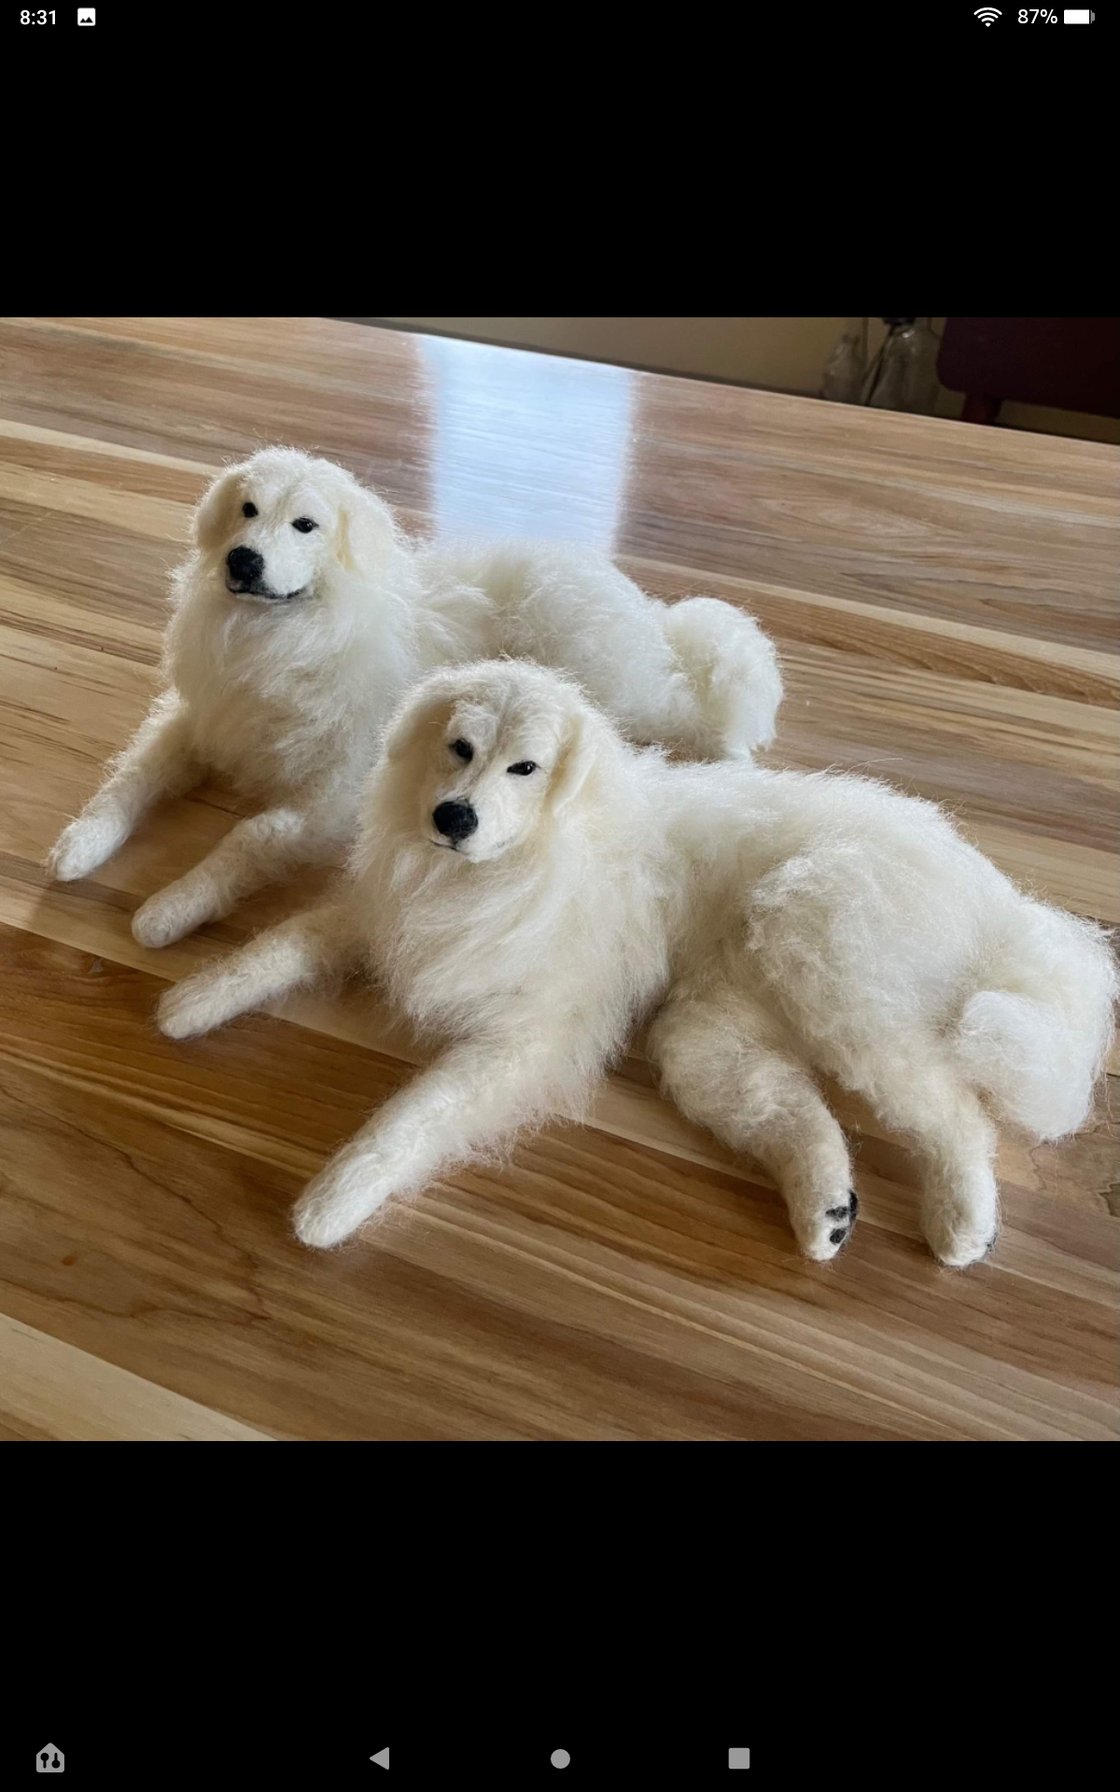 Image of 12" Great Pyrenees or Maremma